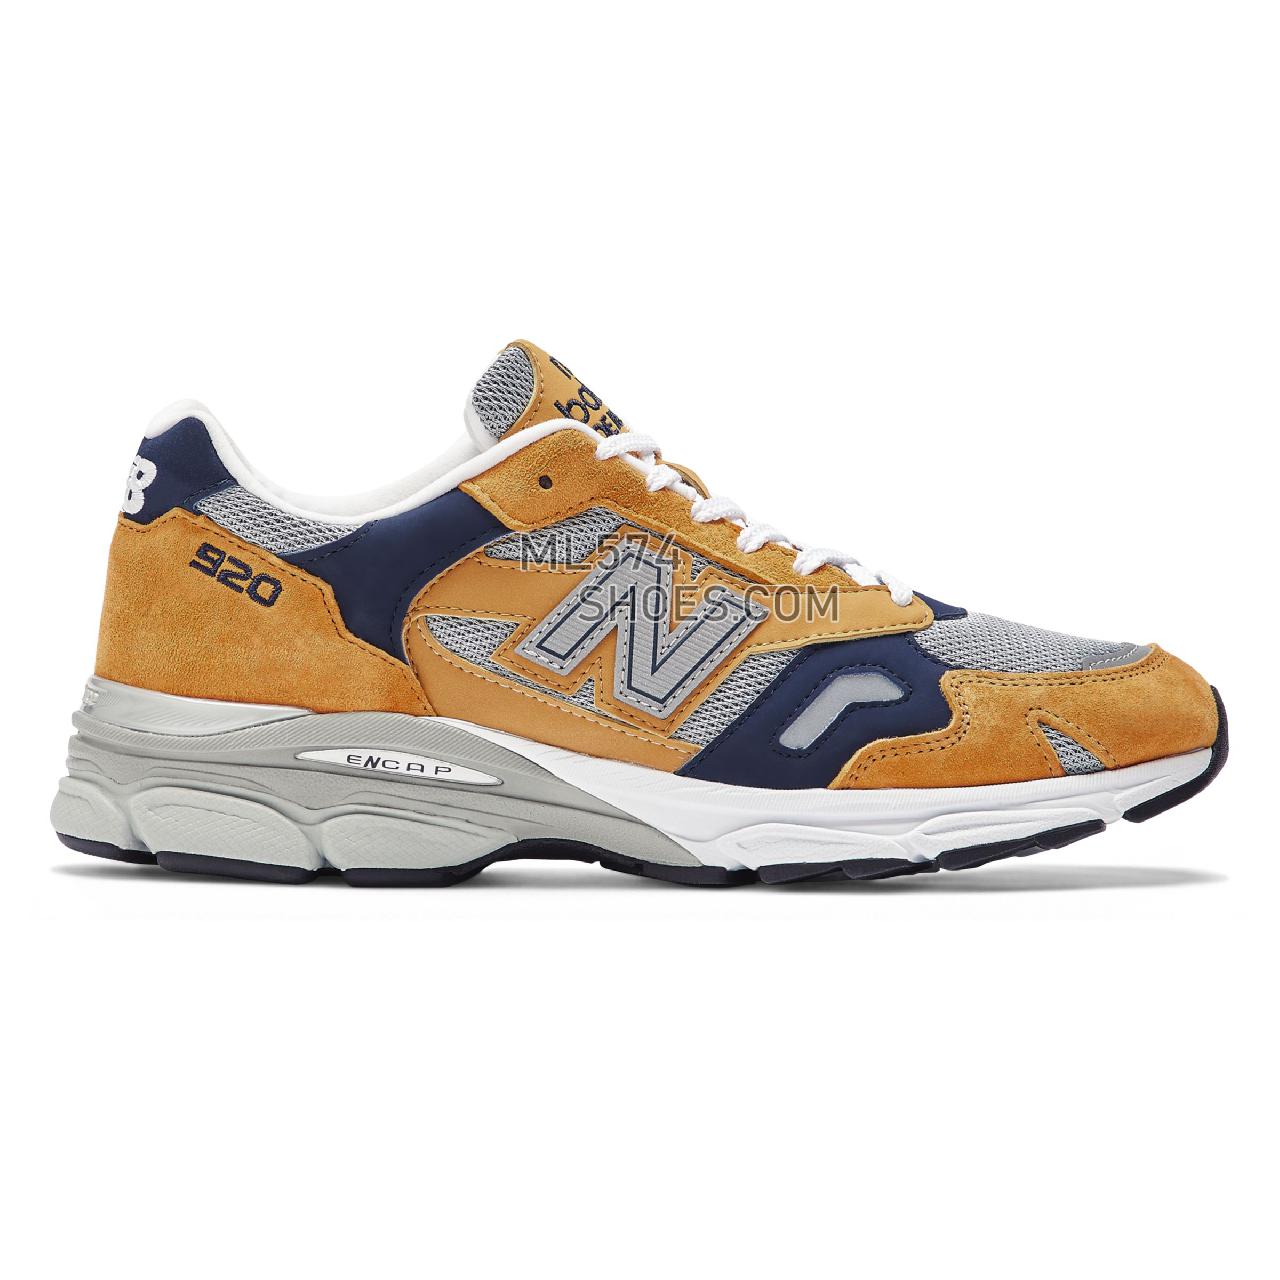 New Balance Made in UK 920 - Men's Made in USA And UK Sneakers - Yellow with grey and navy - M920YN